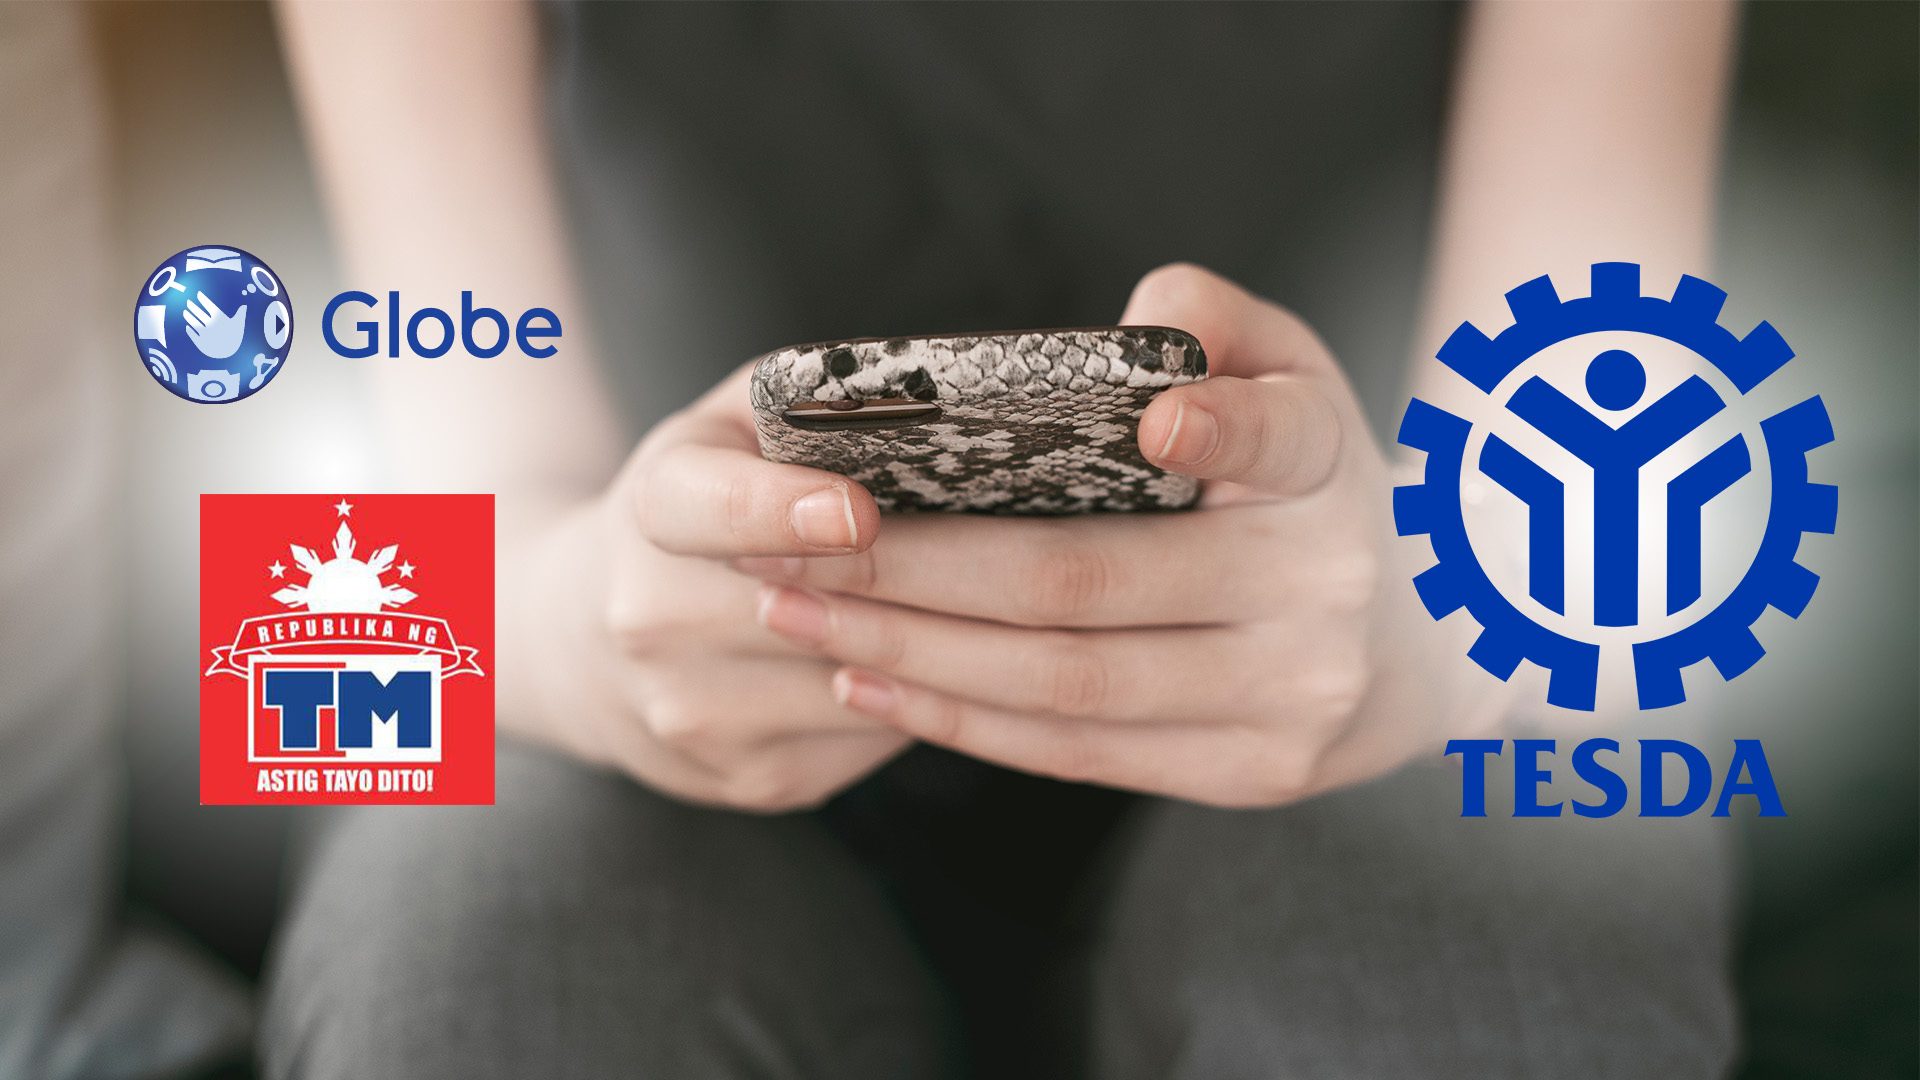 Globe/TM subscribers get free data access to TESDA online courses